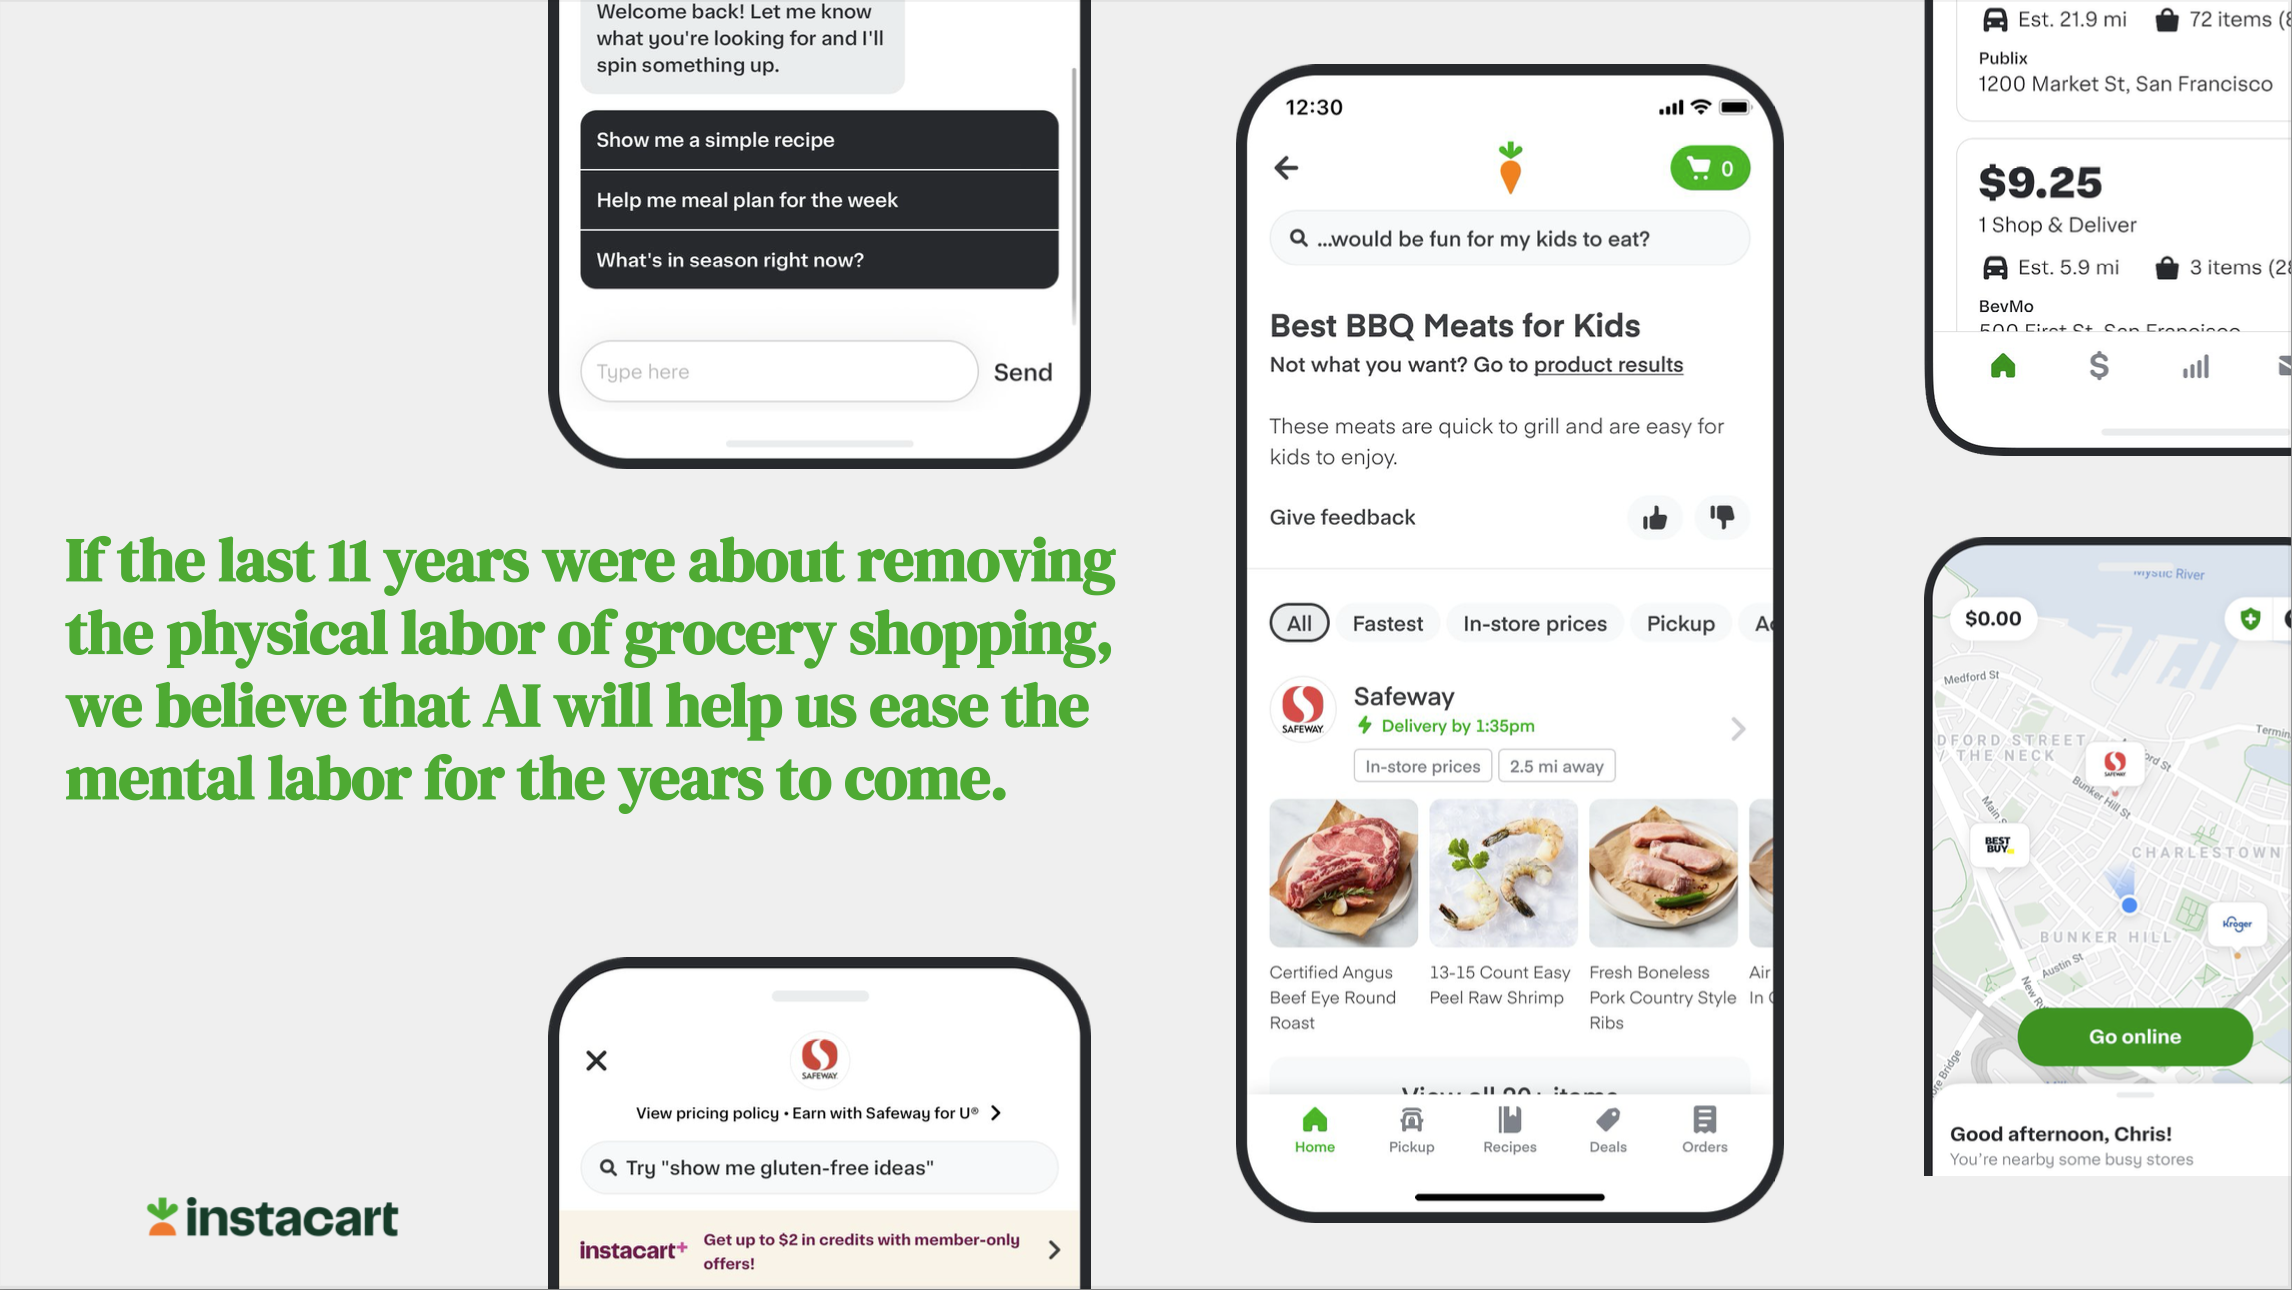 role of AI at Instacart